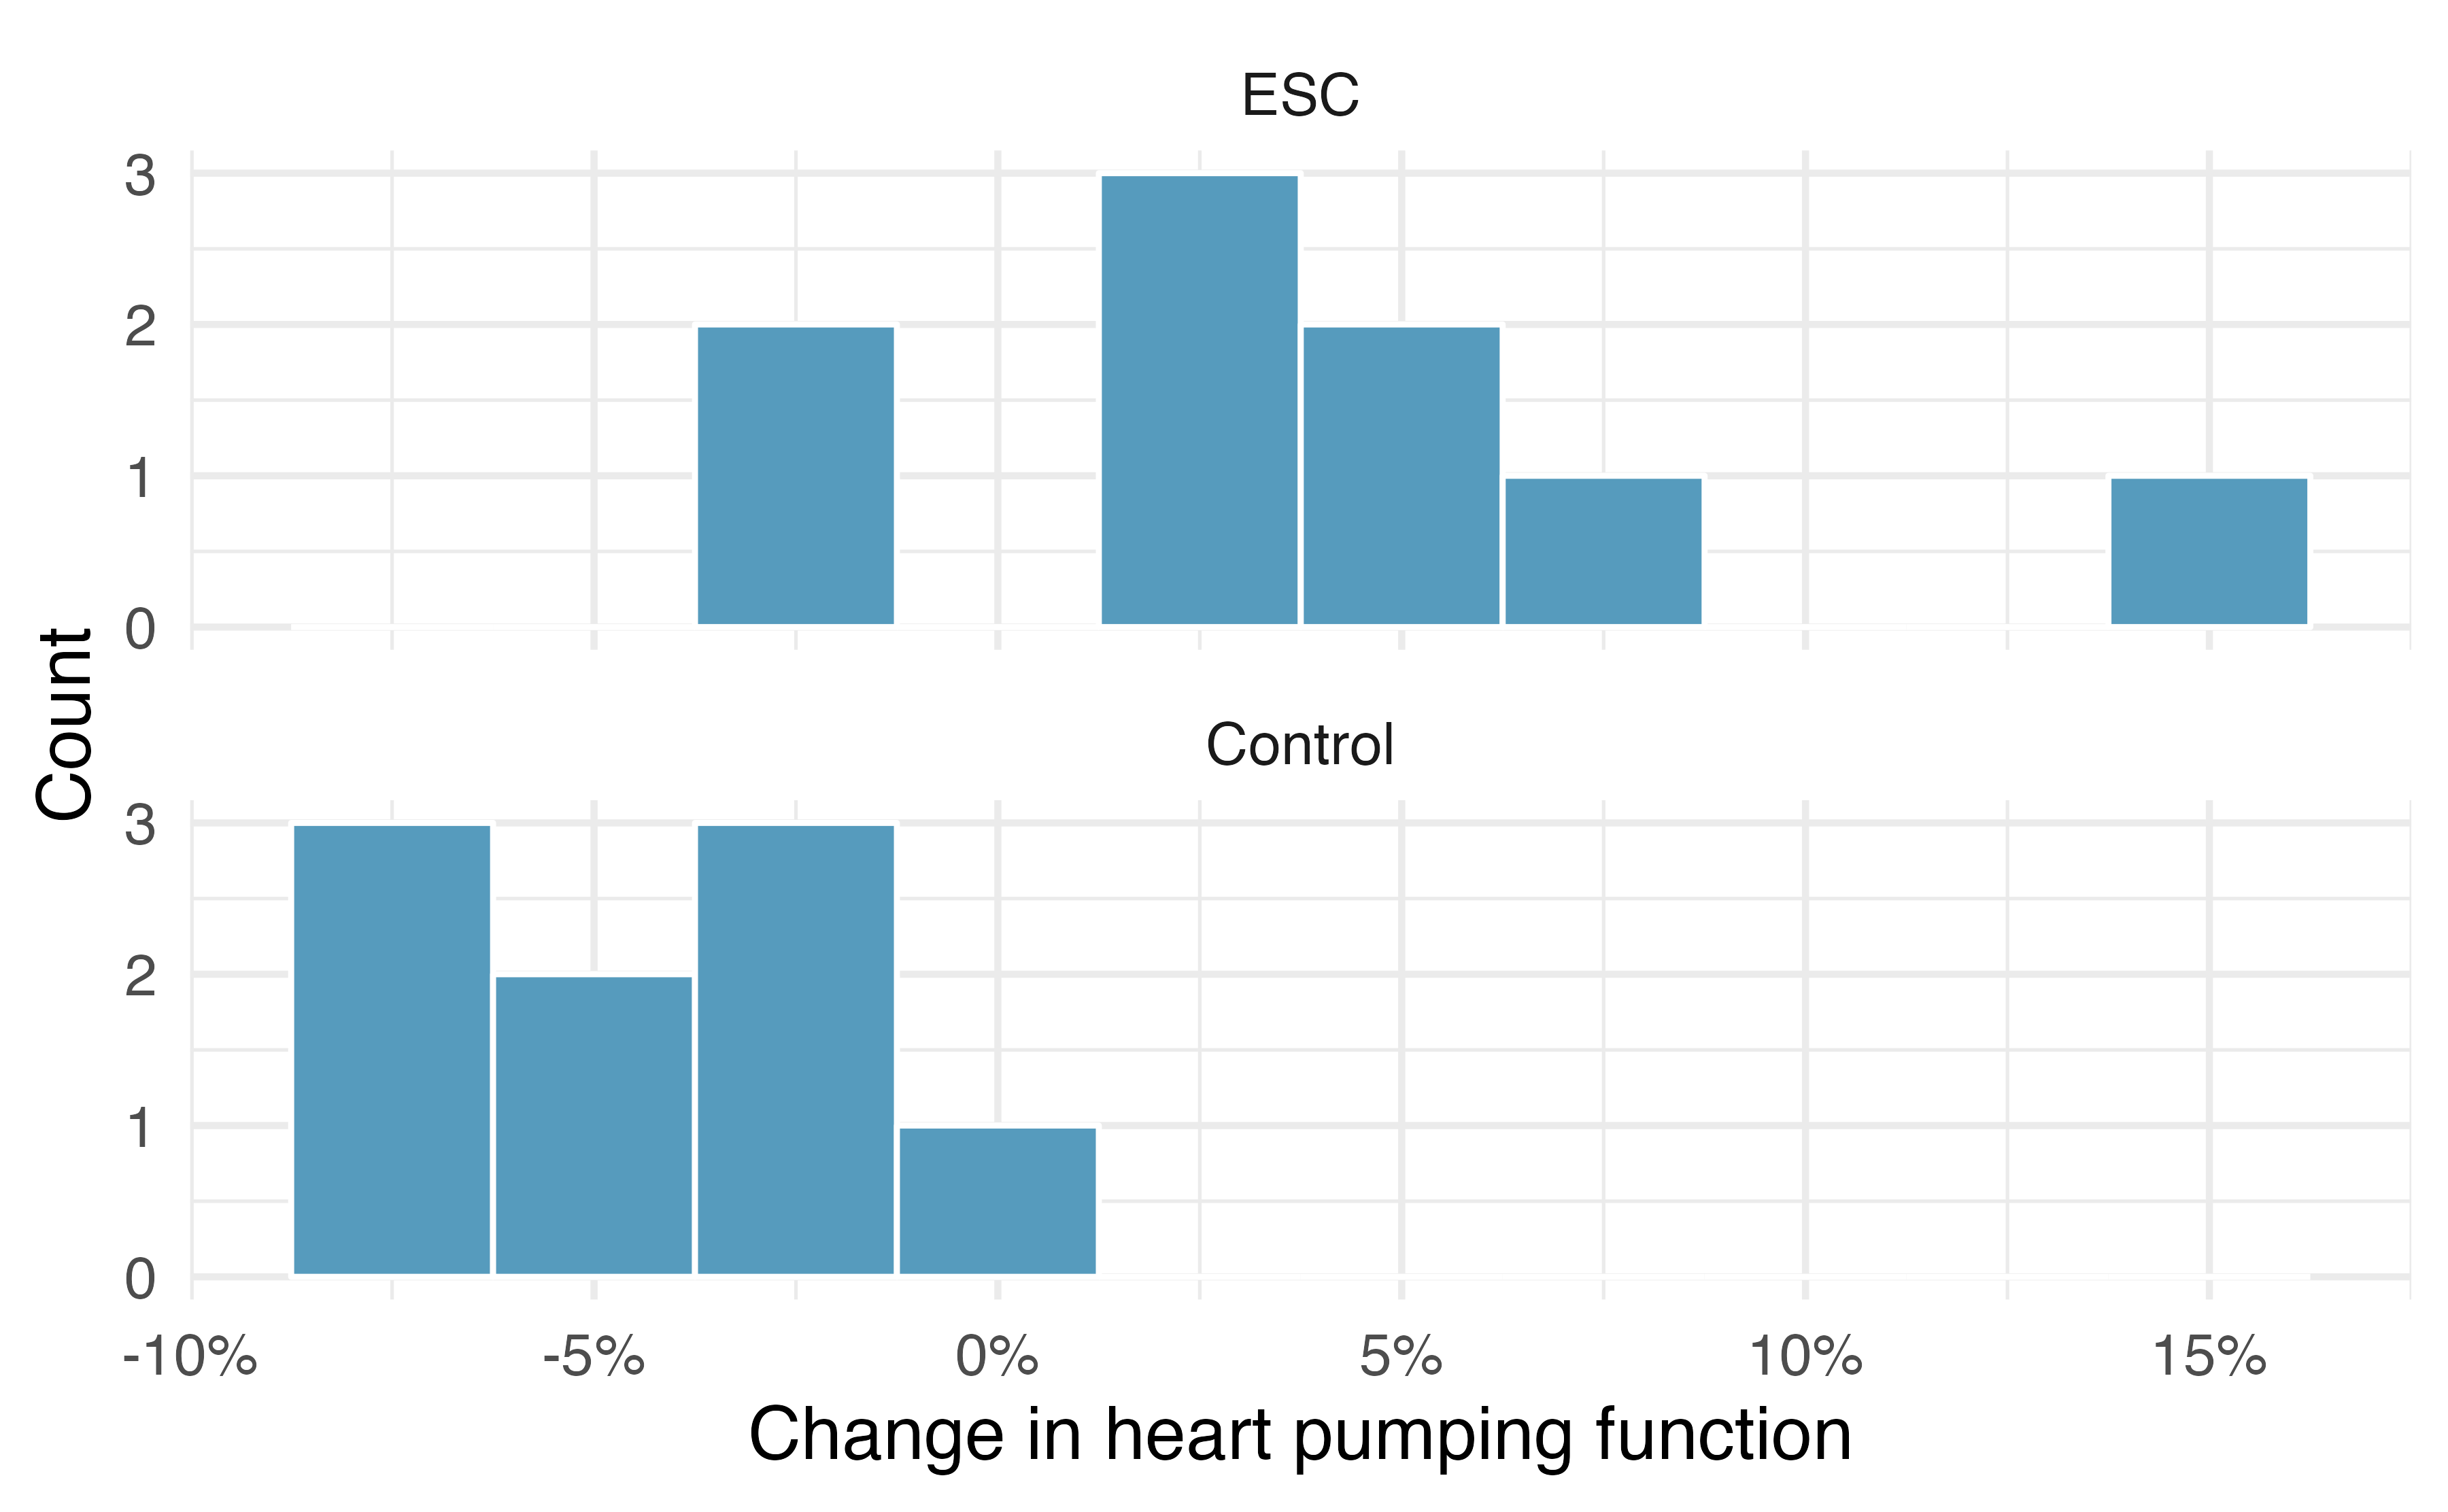 Histograms for the difference in heart pumping function after a heart attack for both the treatment group (ESC, which received an the embryonic stem cell treatment) and the control group (which did not receive the treatment).